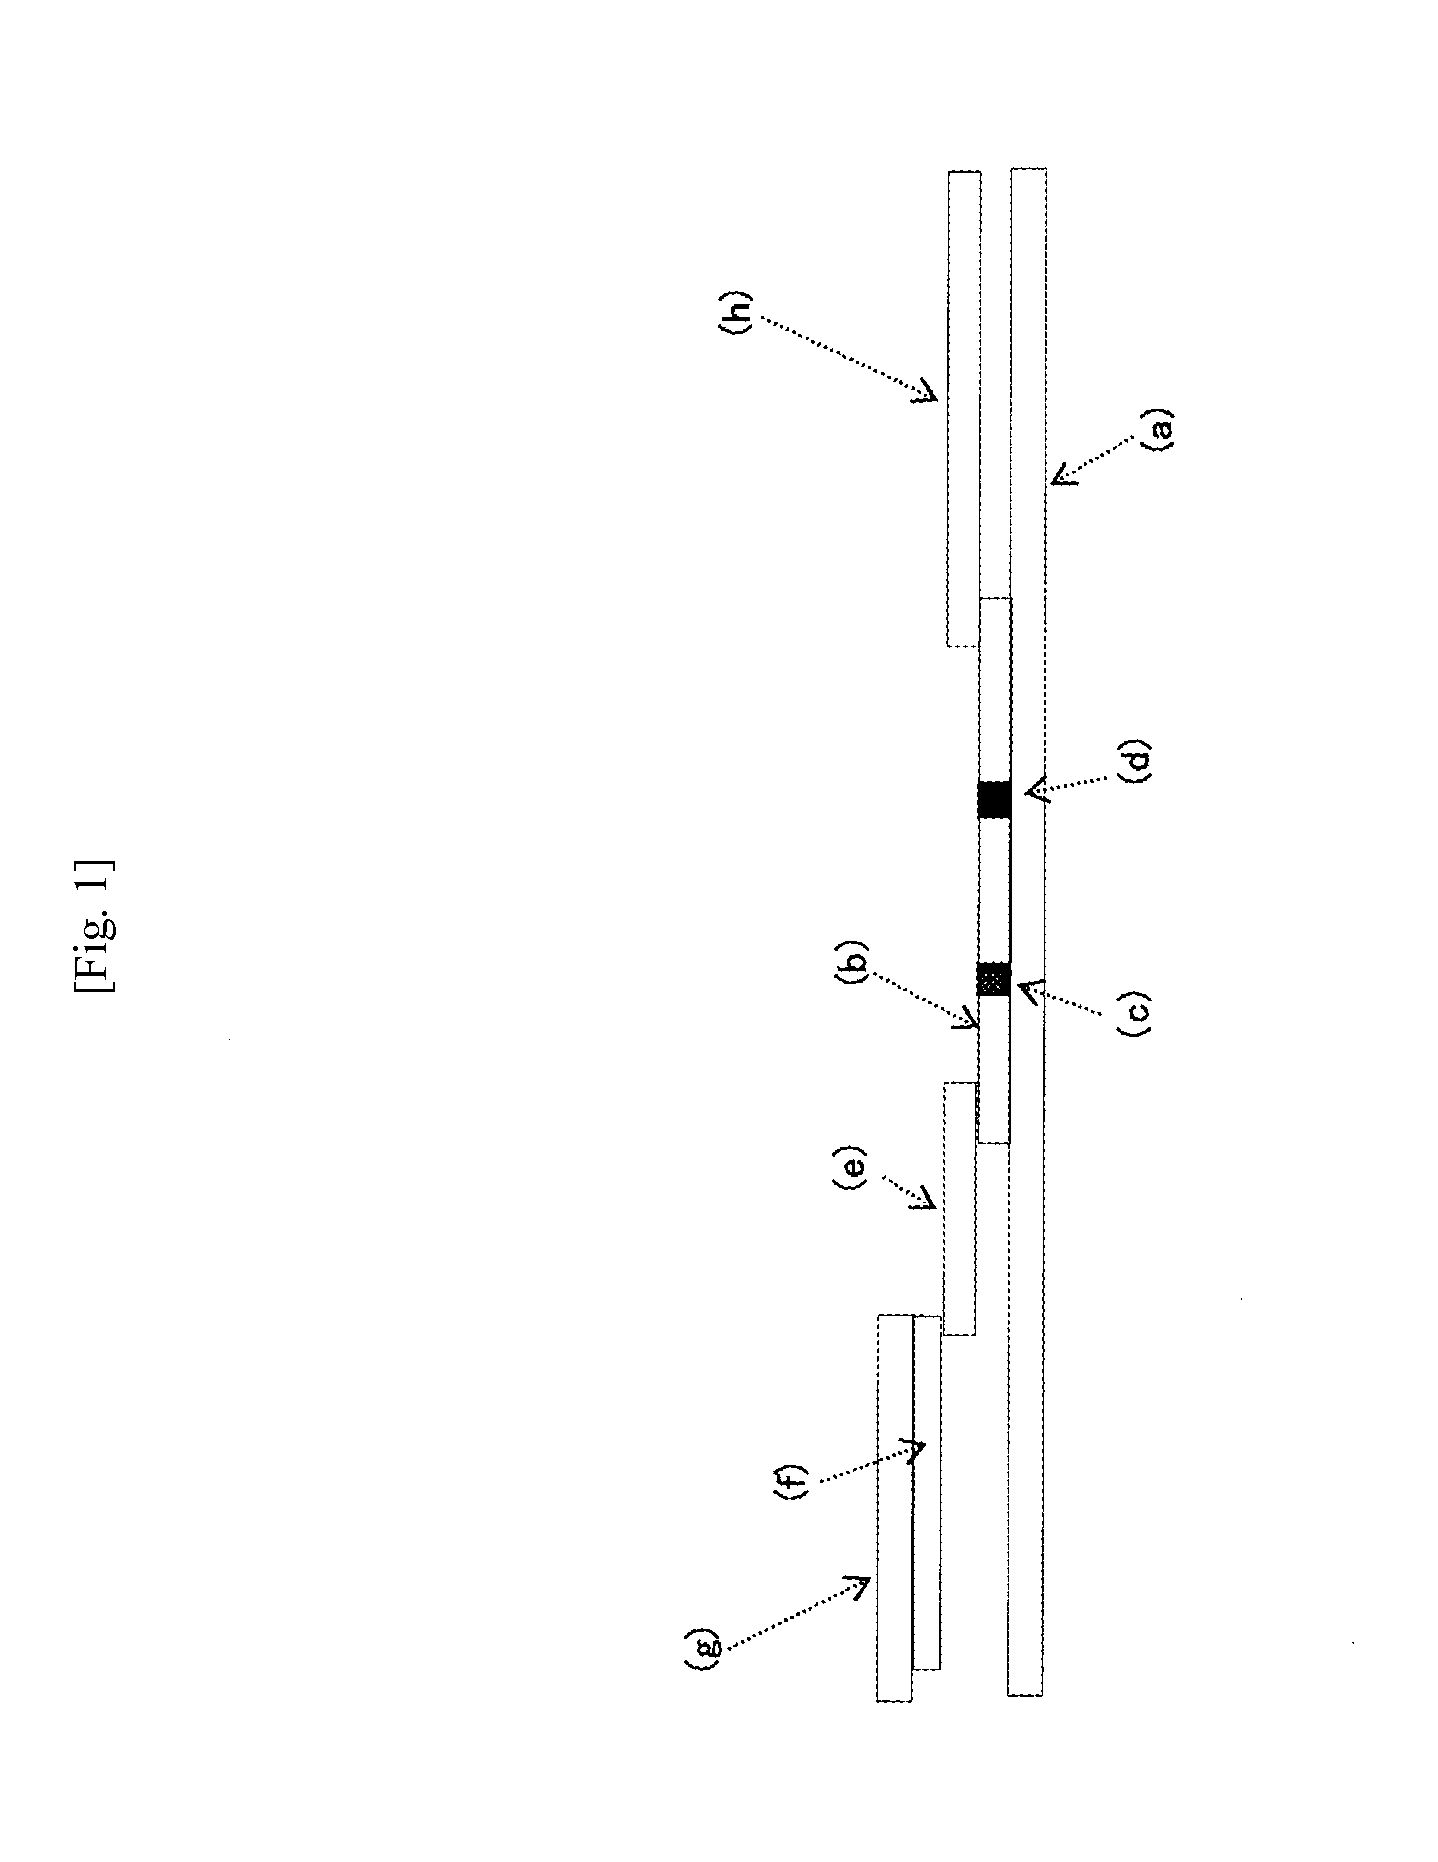 Immunochromatographic test strip and detection method using immunochromatography for detecting target in red blood cell-containing sample